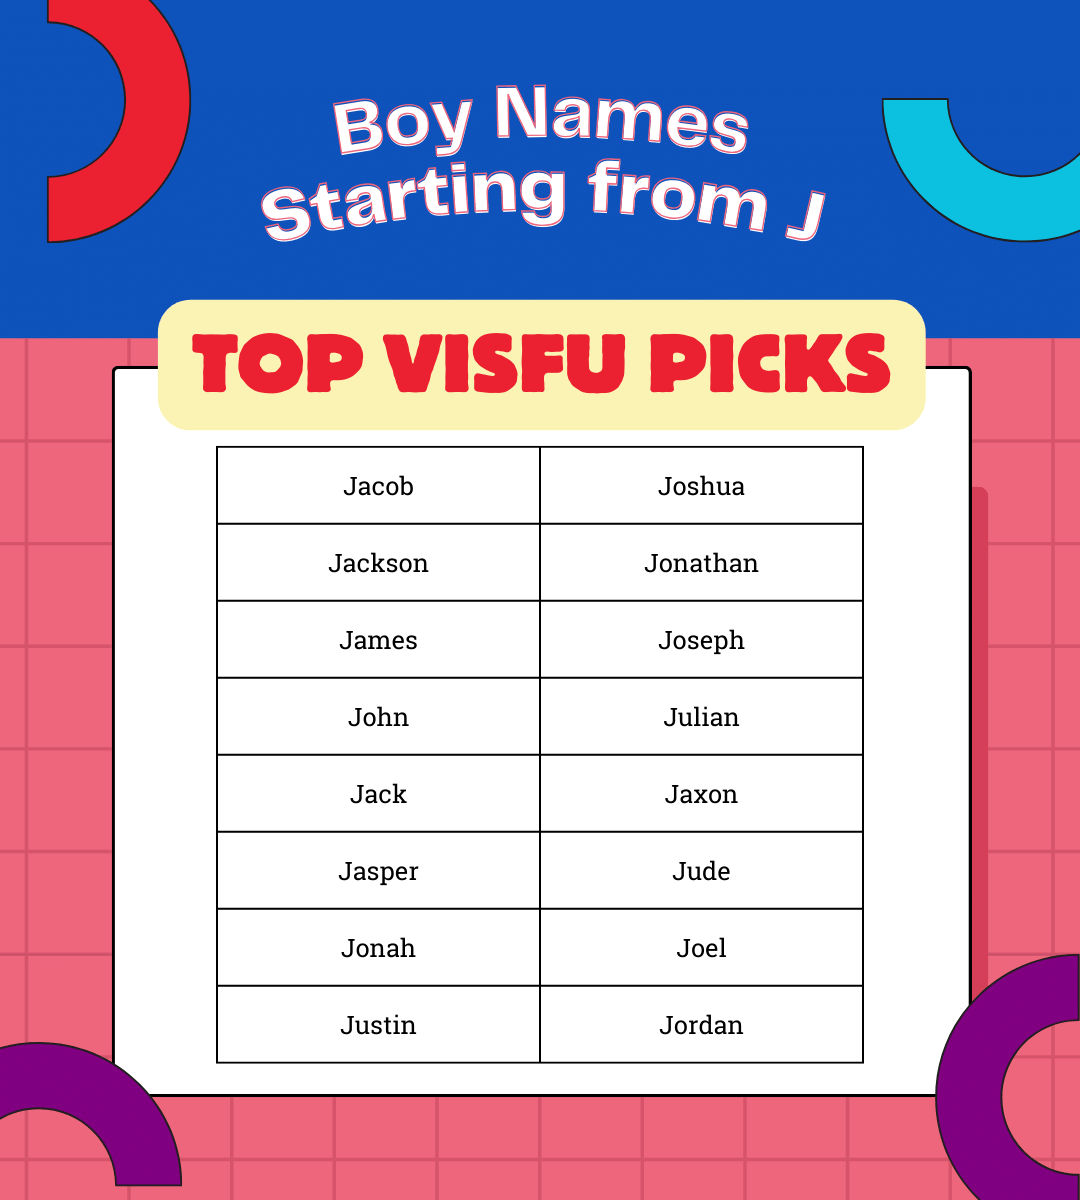 Boy names starting from J